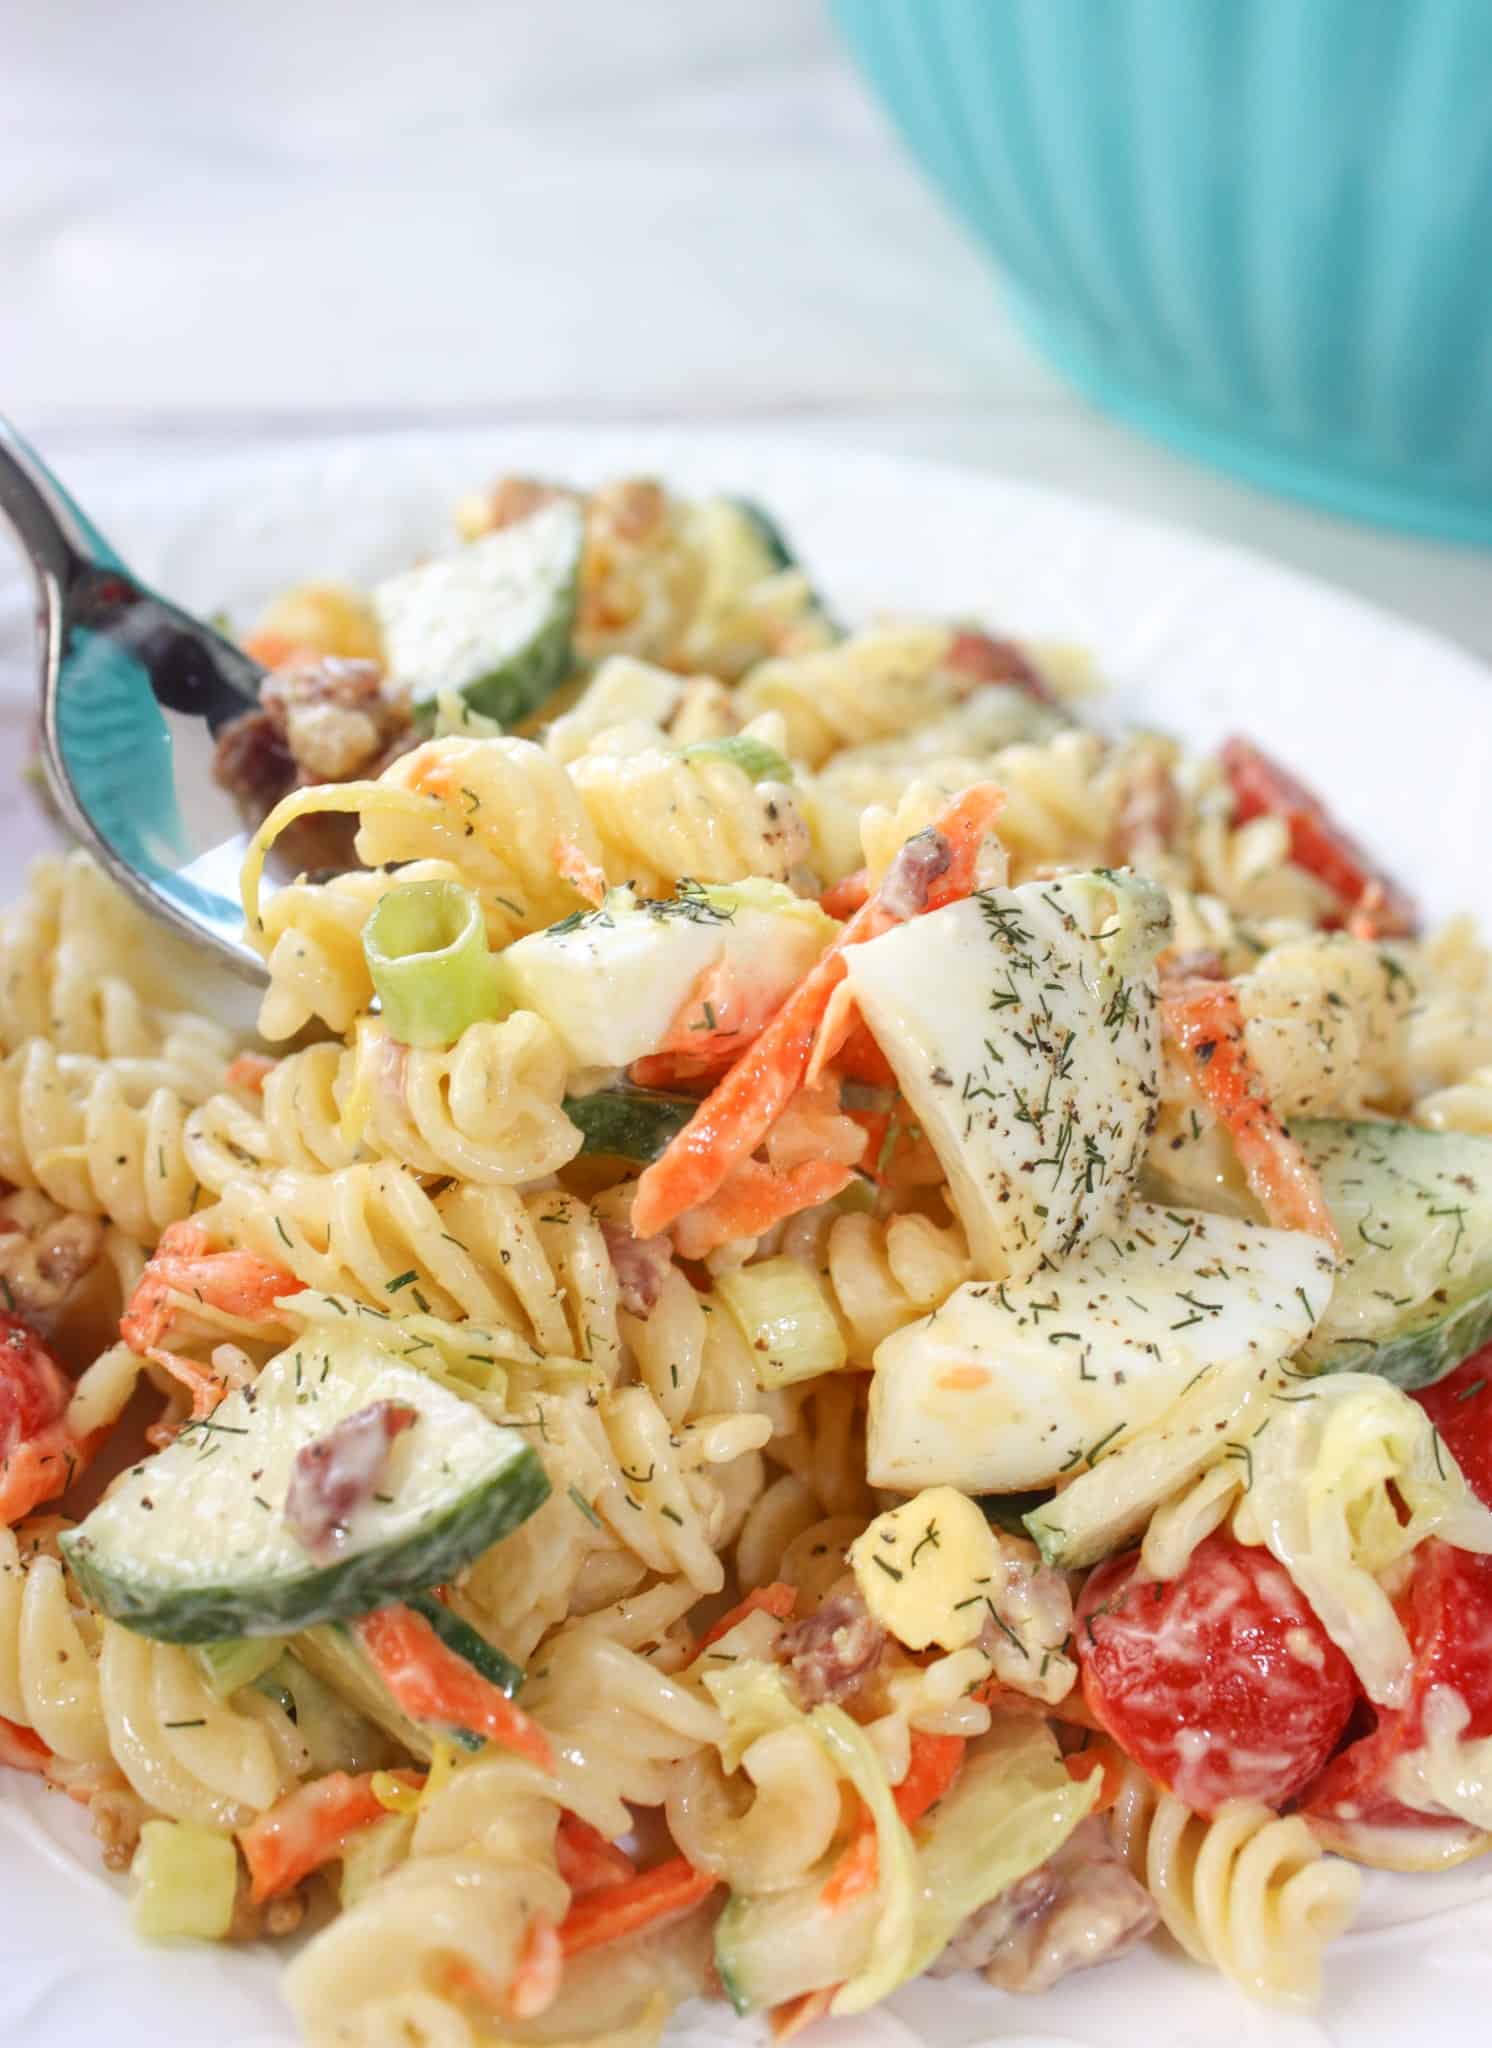 Creamy Lemon Dill Pasta Salad is a flavourful side dish for any occasion.  Loaded with gluten free pasta, vegetables, bacon and dried dill it is a tasty,colourful addition to any meal.